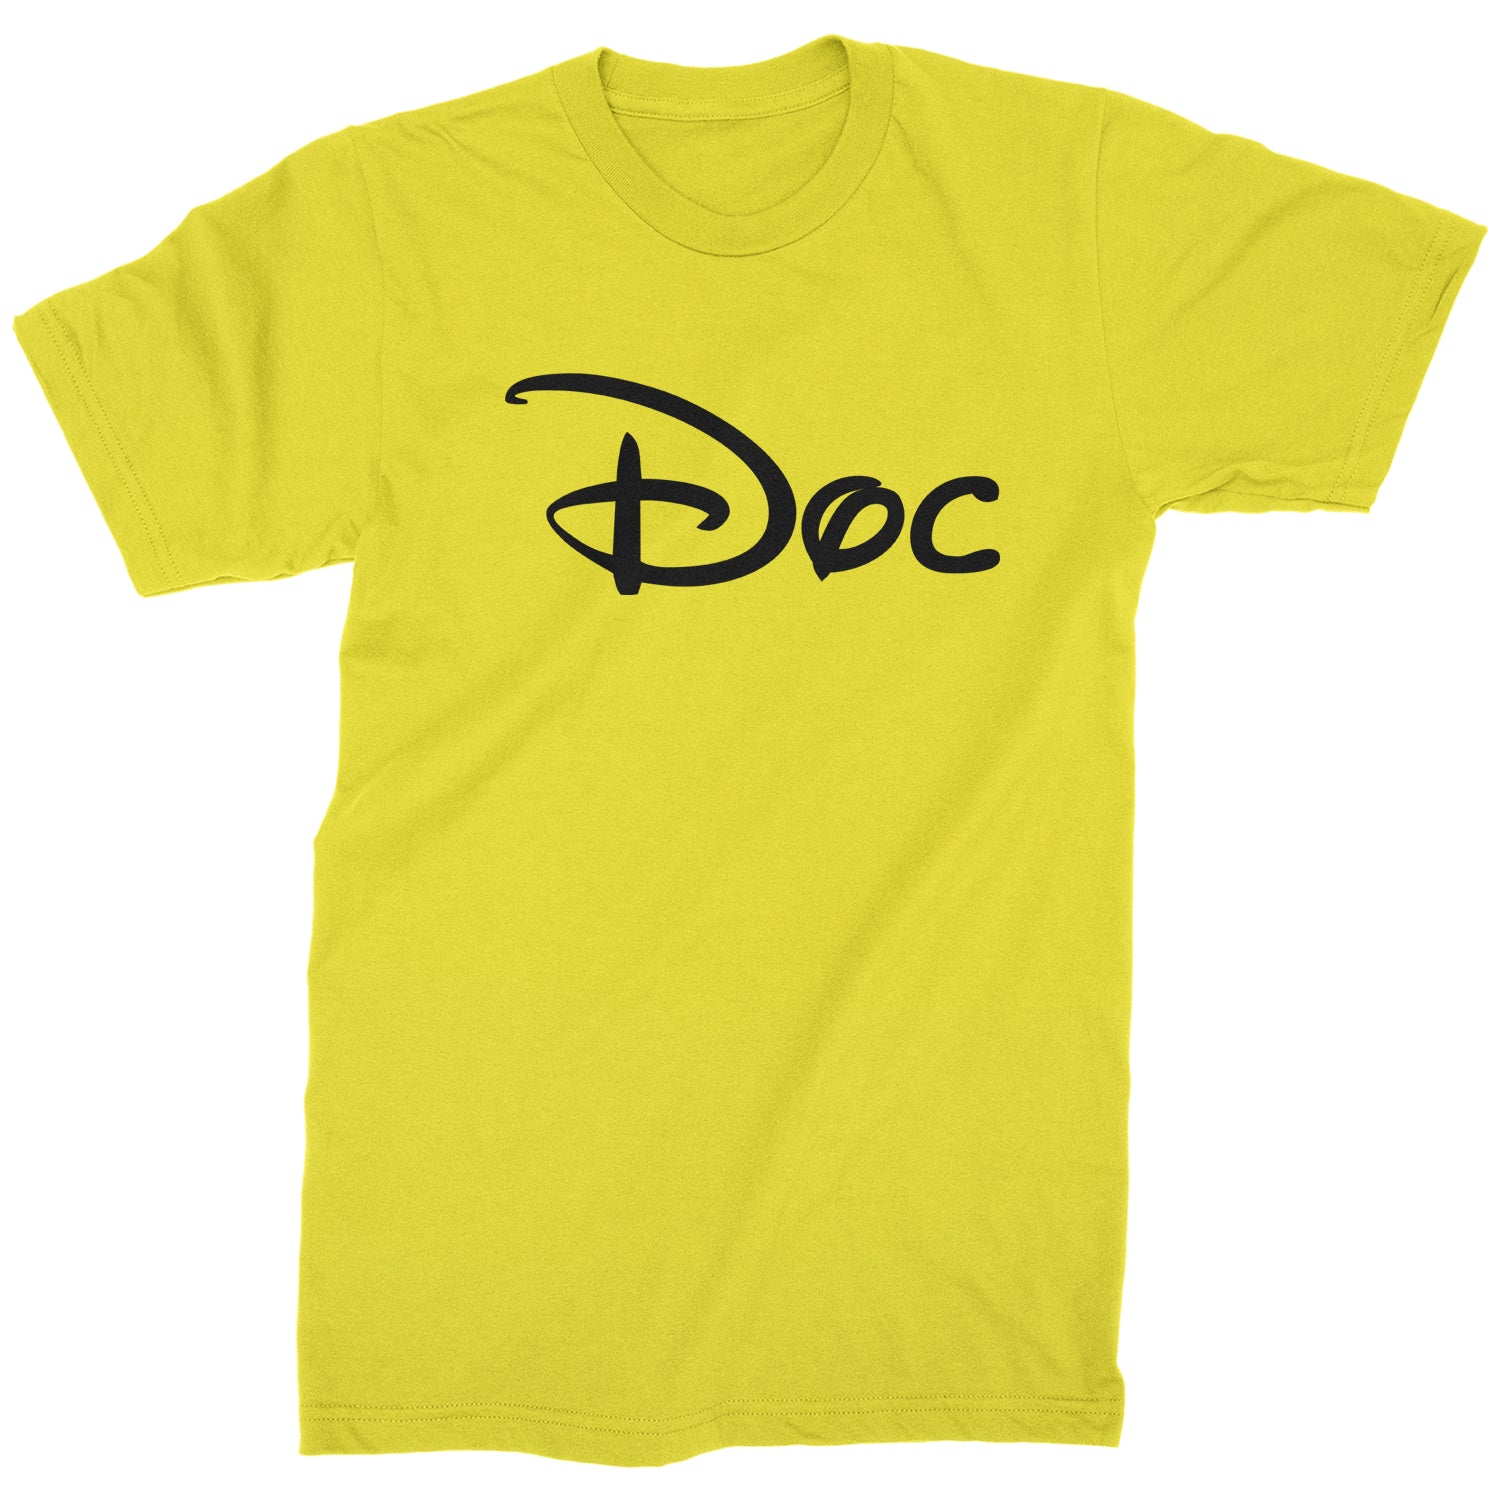 Doc - 7 Dwarfs Costume Mens T-shirt and, costume, dwarfs, group, halloween, matching, seven, snow, the, white by Expression Tees